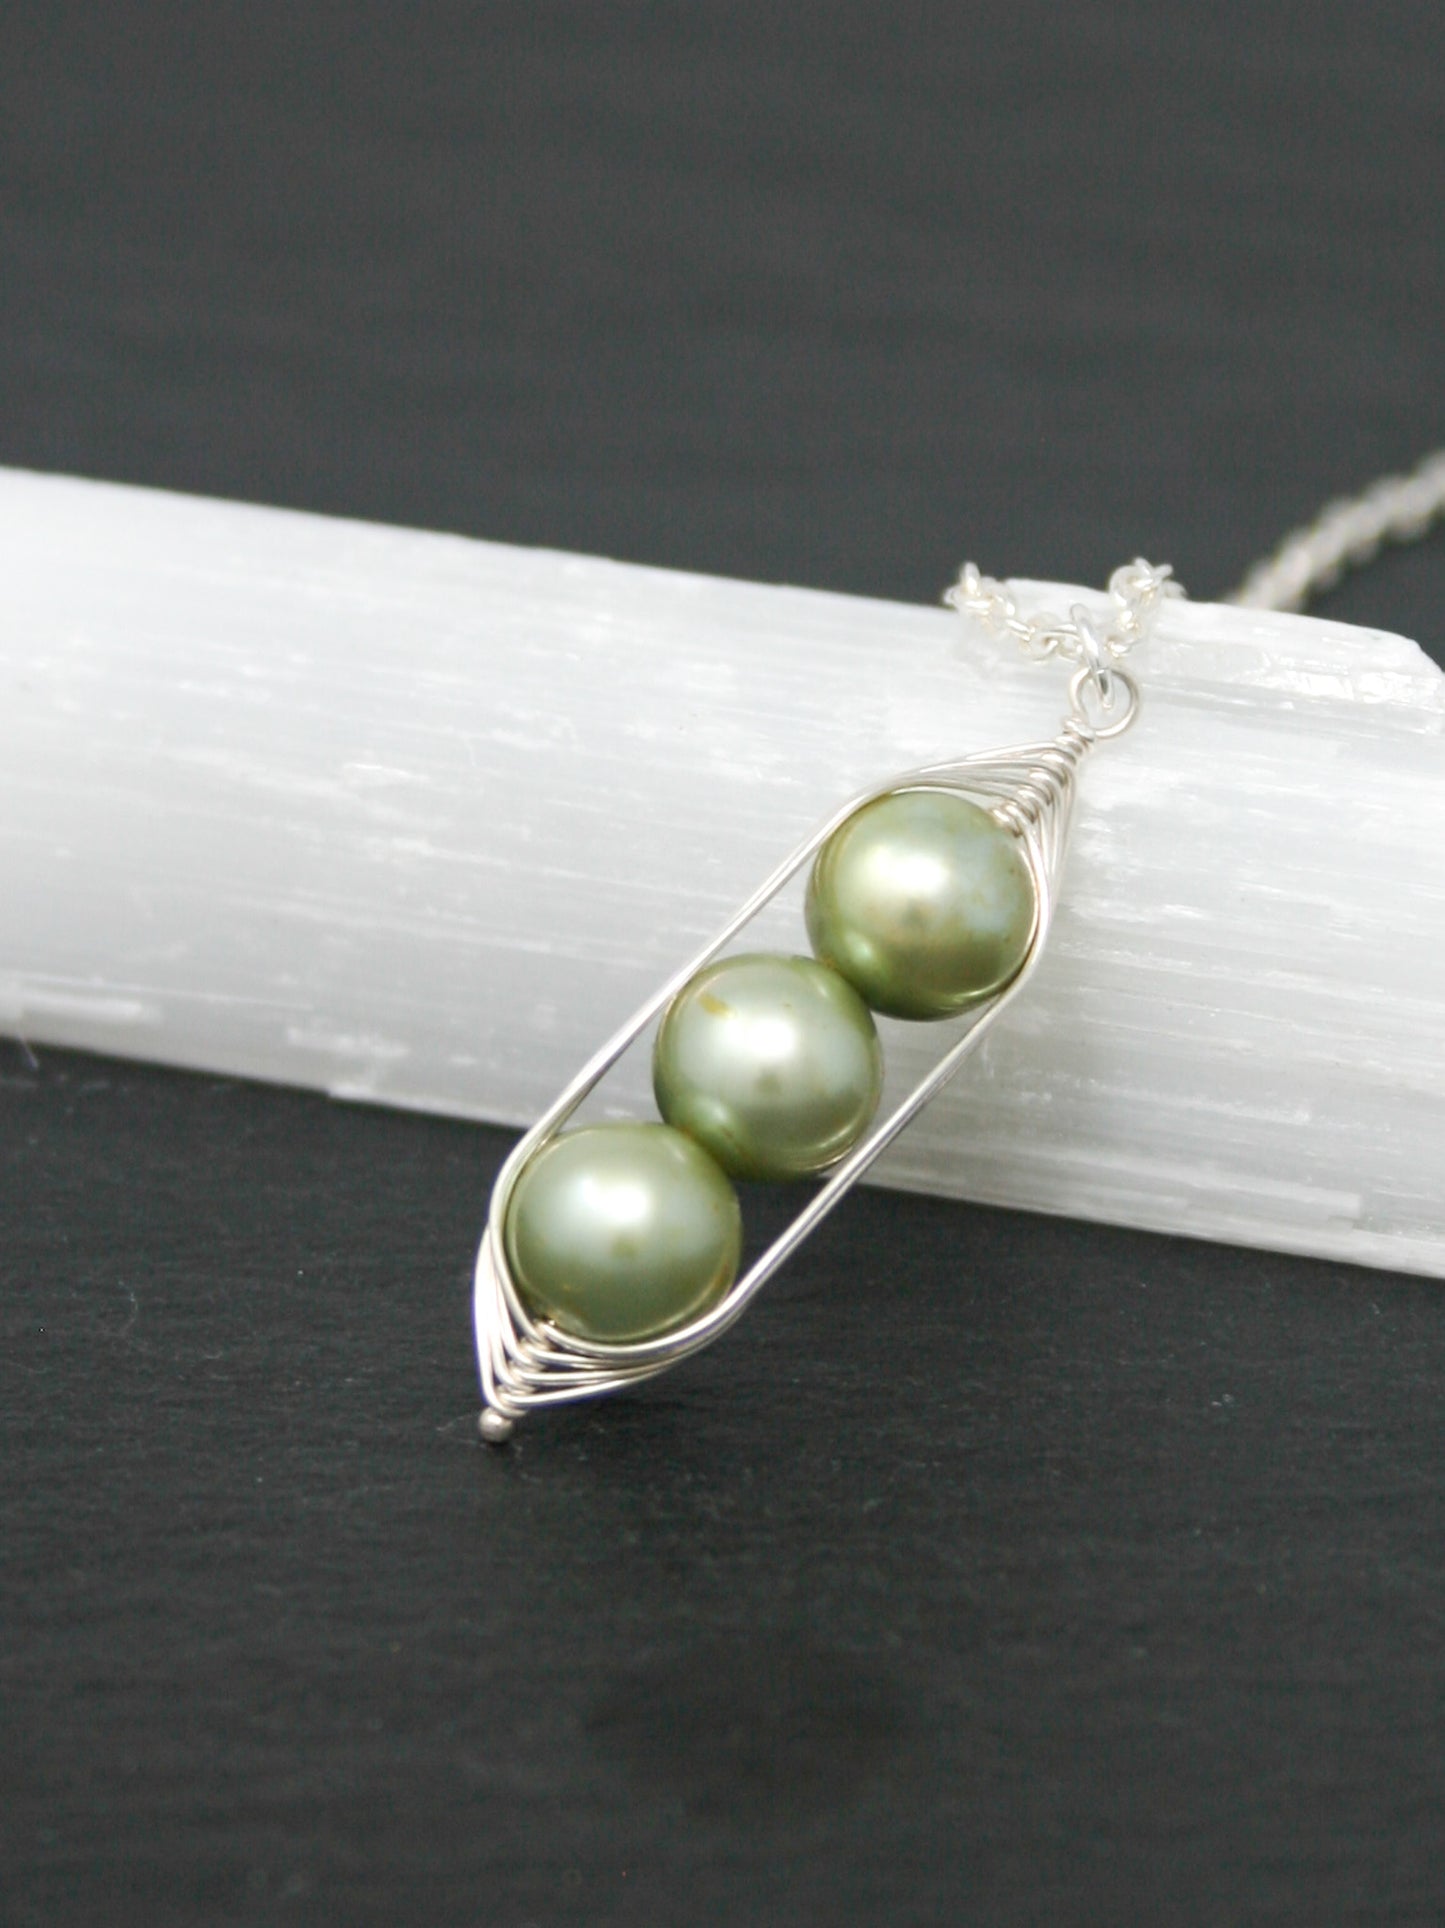 Three peas in a pod necklace [made to order]